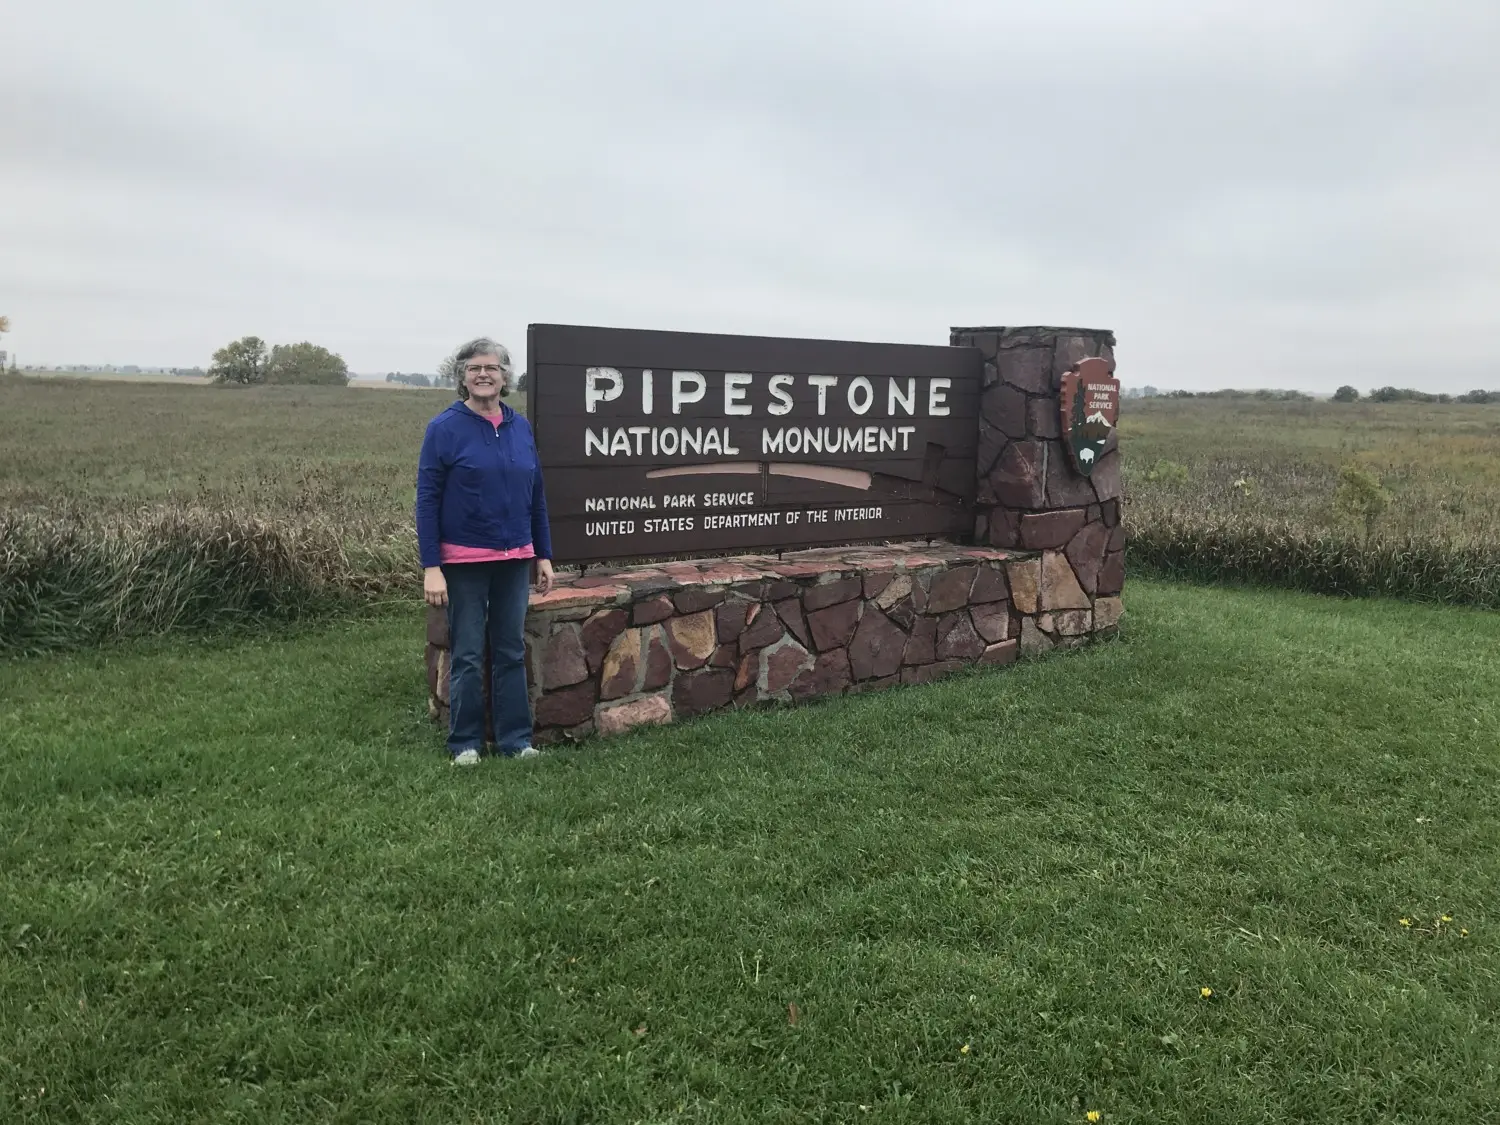 pipestone national monument - Day Trips from Minneapolis